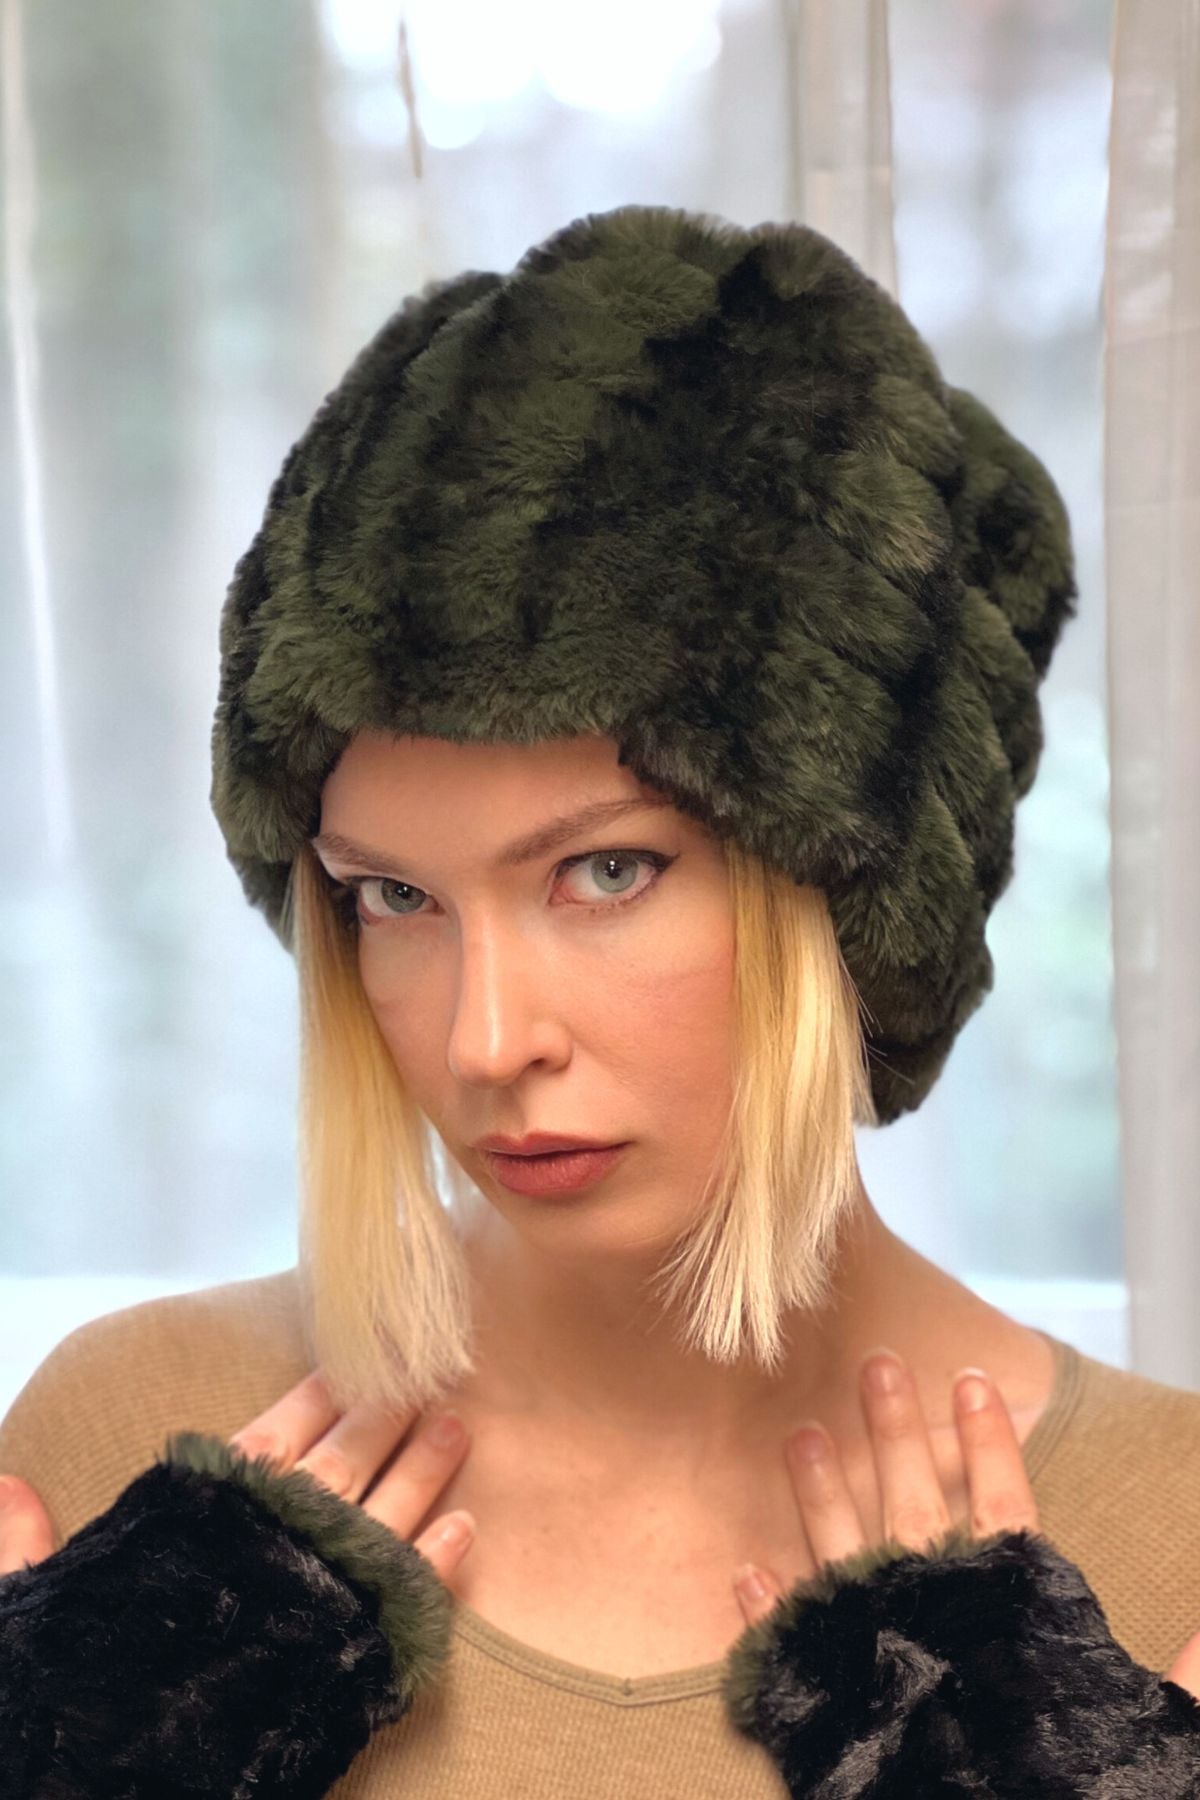 Model wearing the Faux Fur Beanie Hat in Black Pine with matching Fingerless Gloves. The fabric is from the Royal Opulence Faux Furs. Pandemonium is located in Seattle, WA